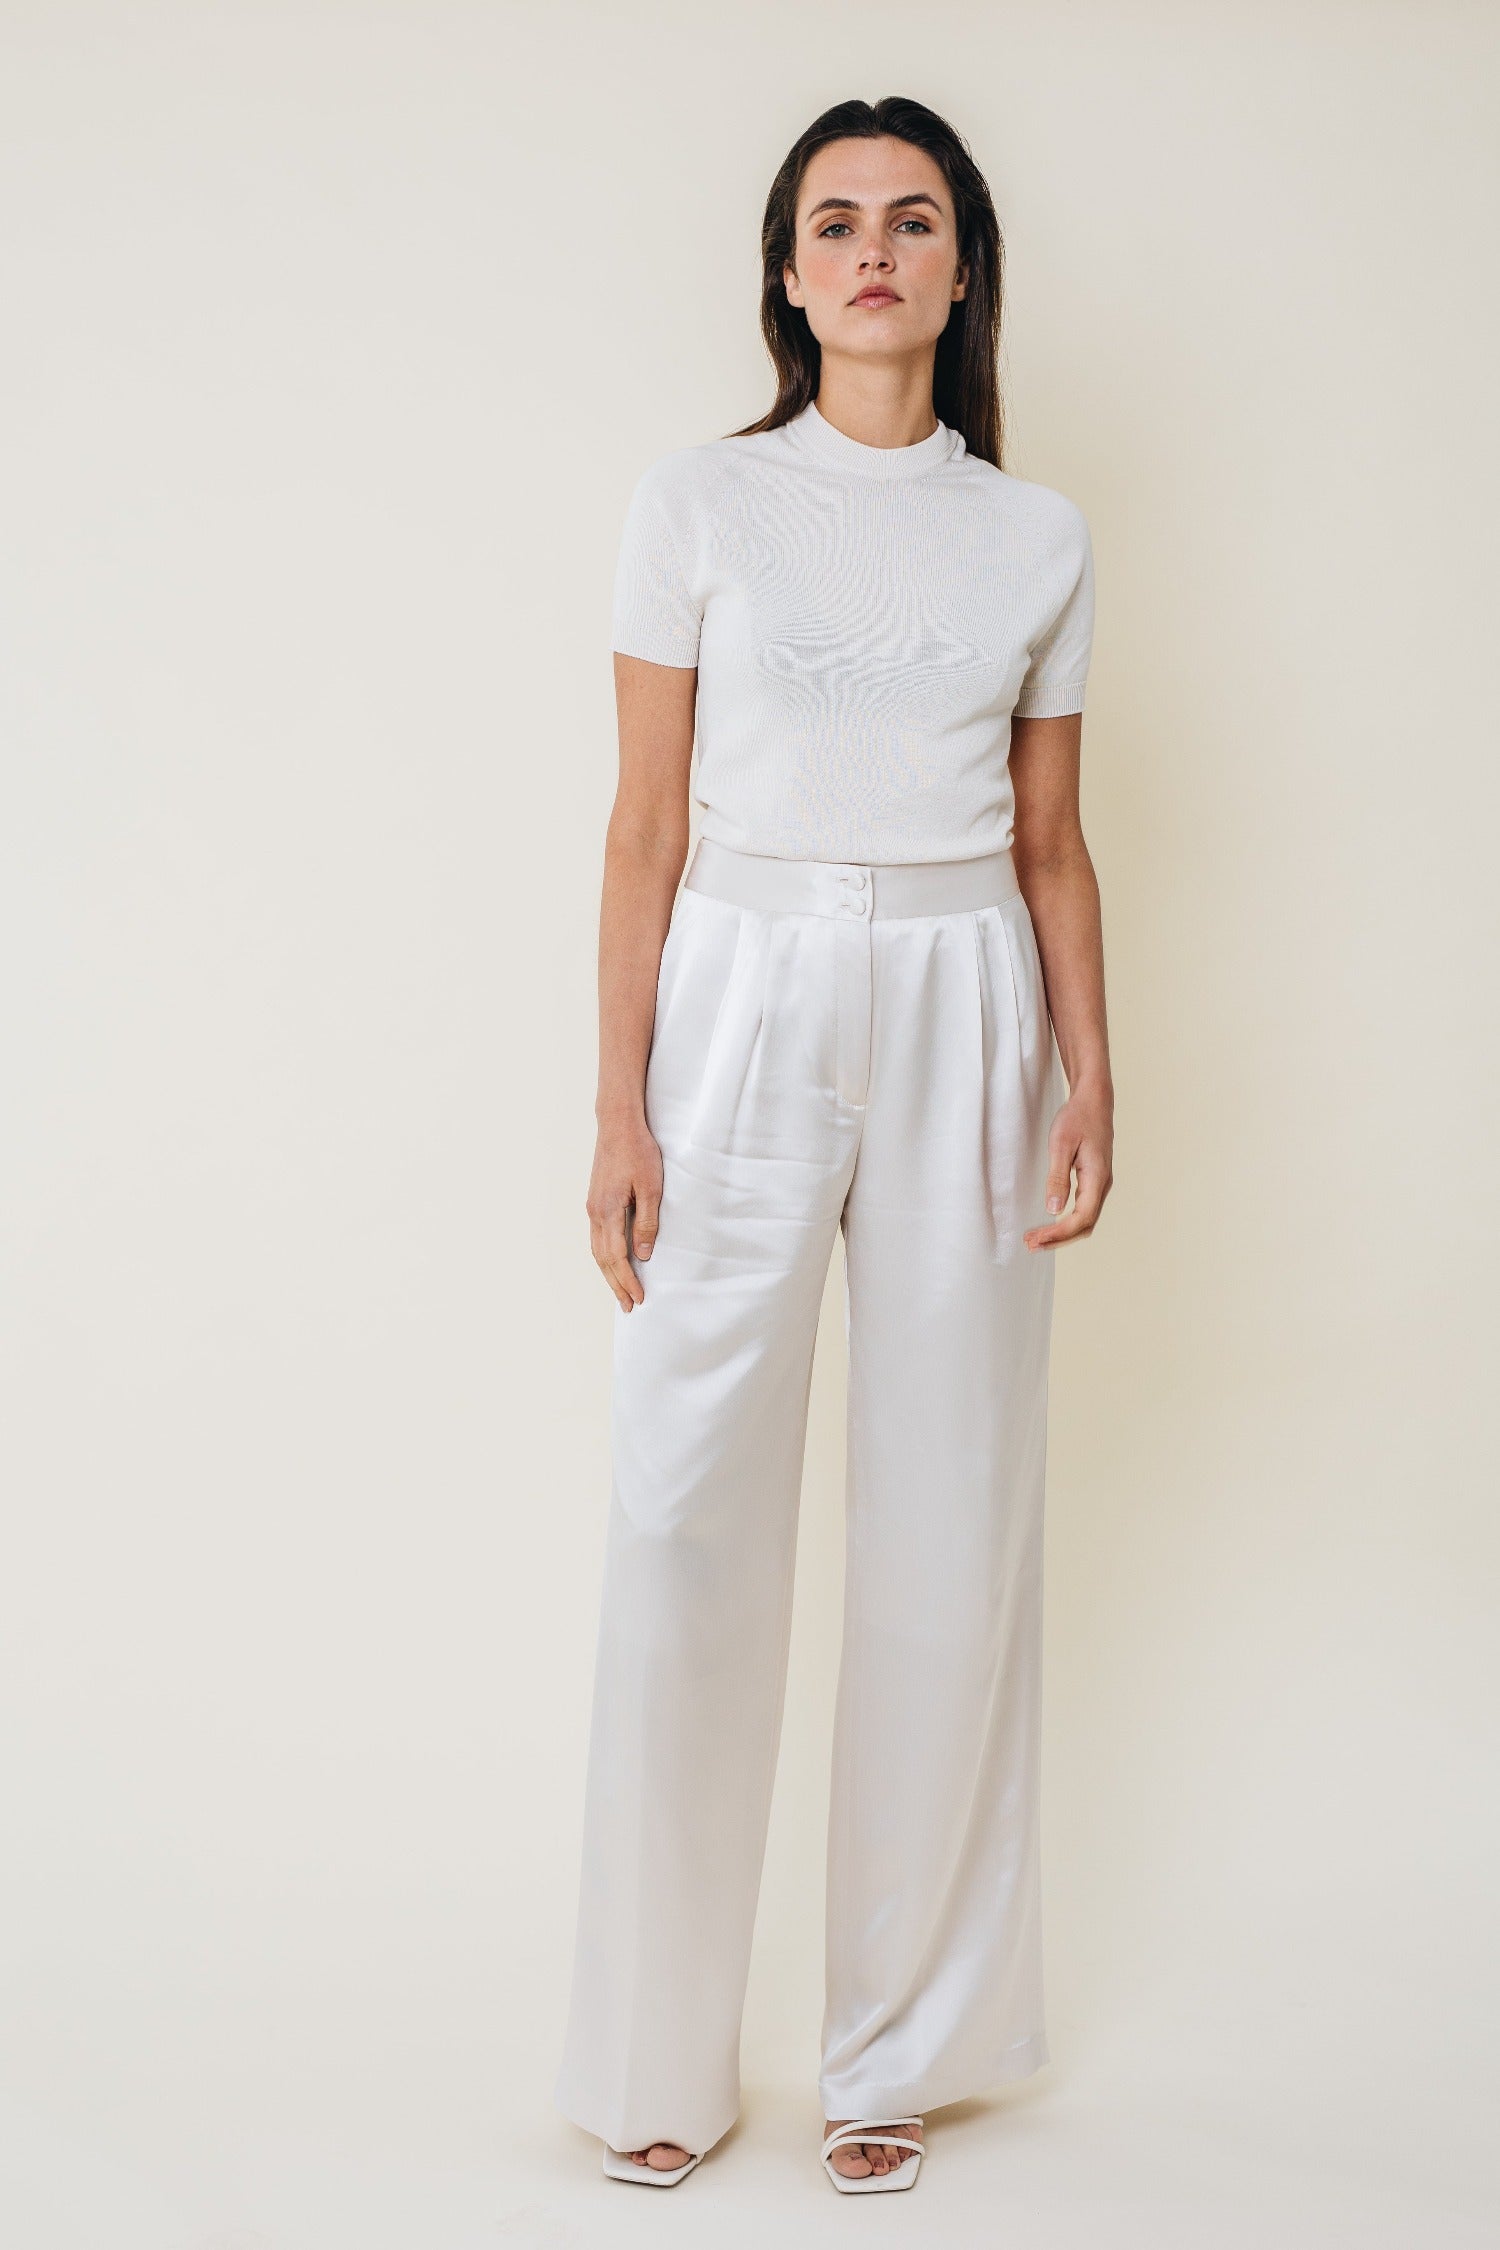 Off-white satin trousers